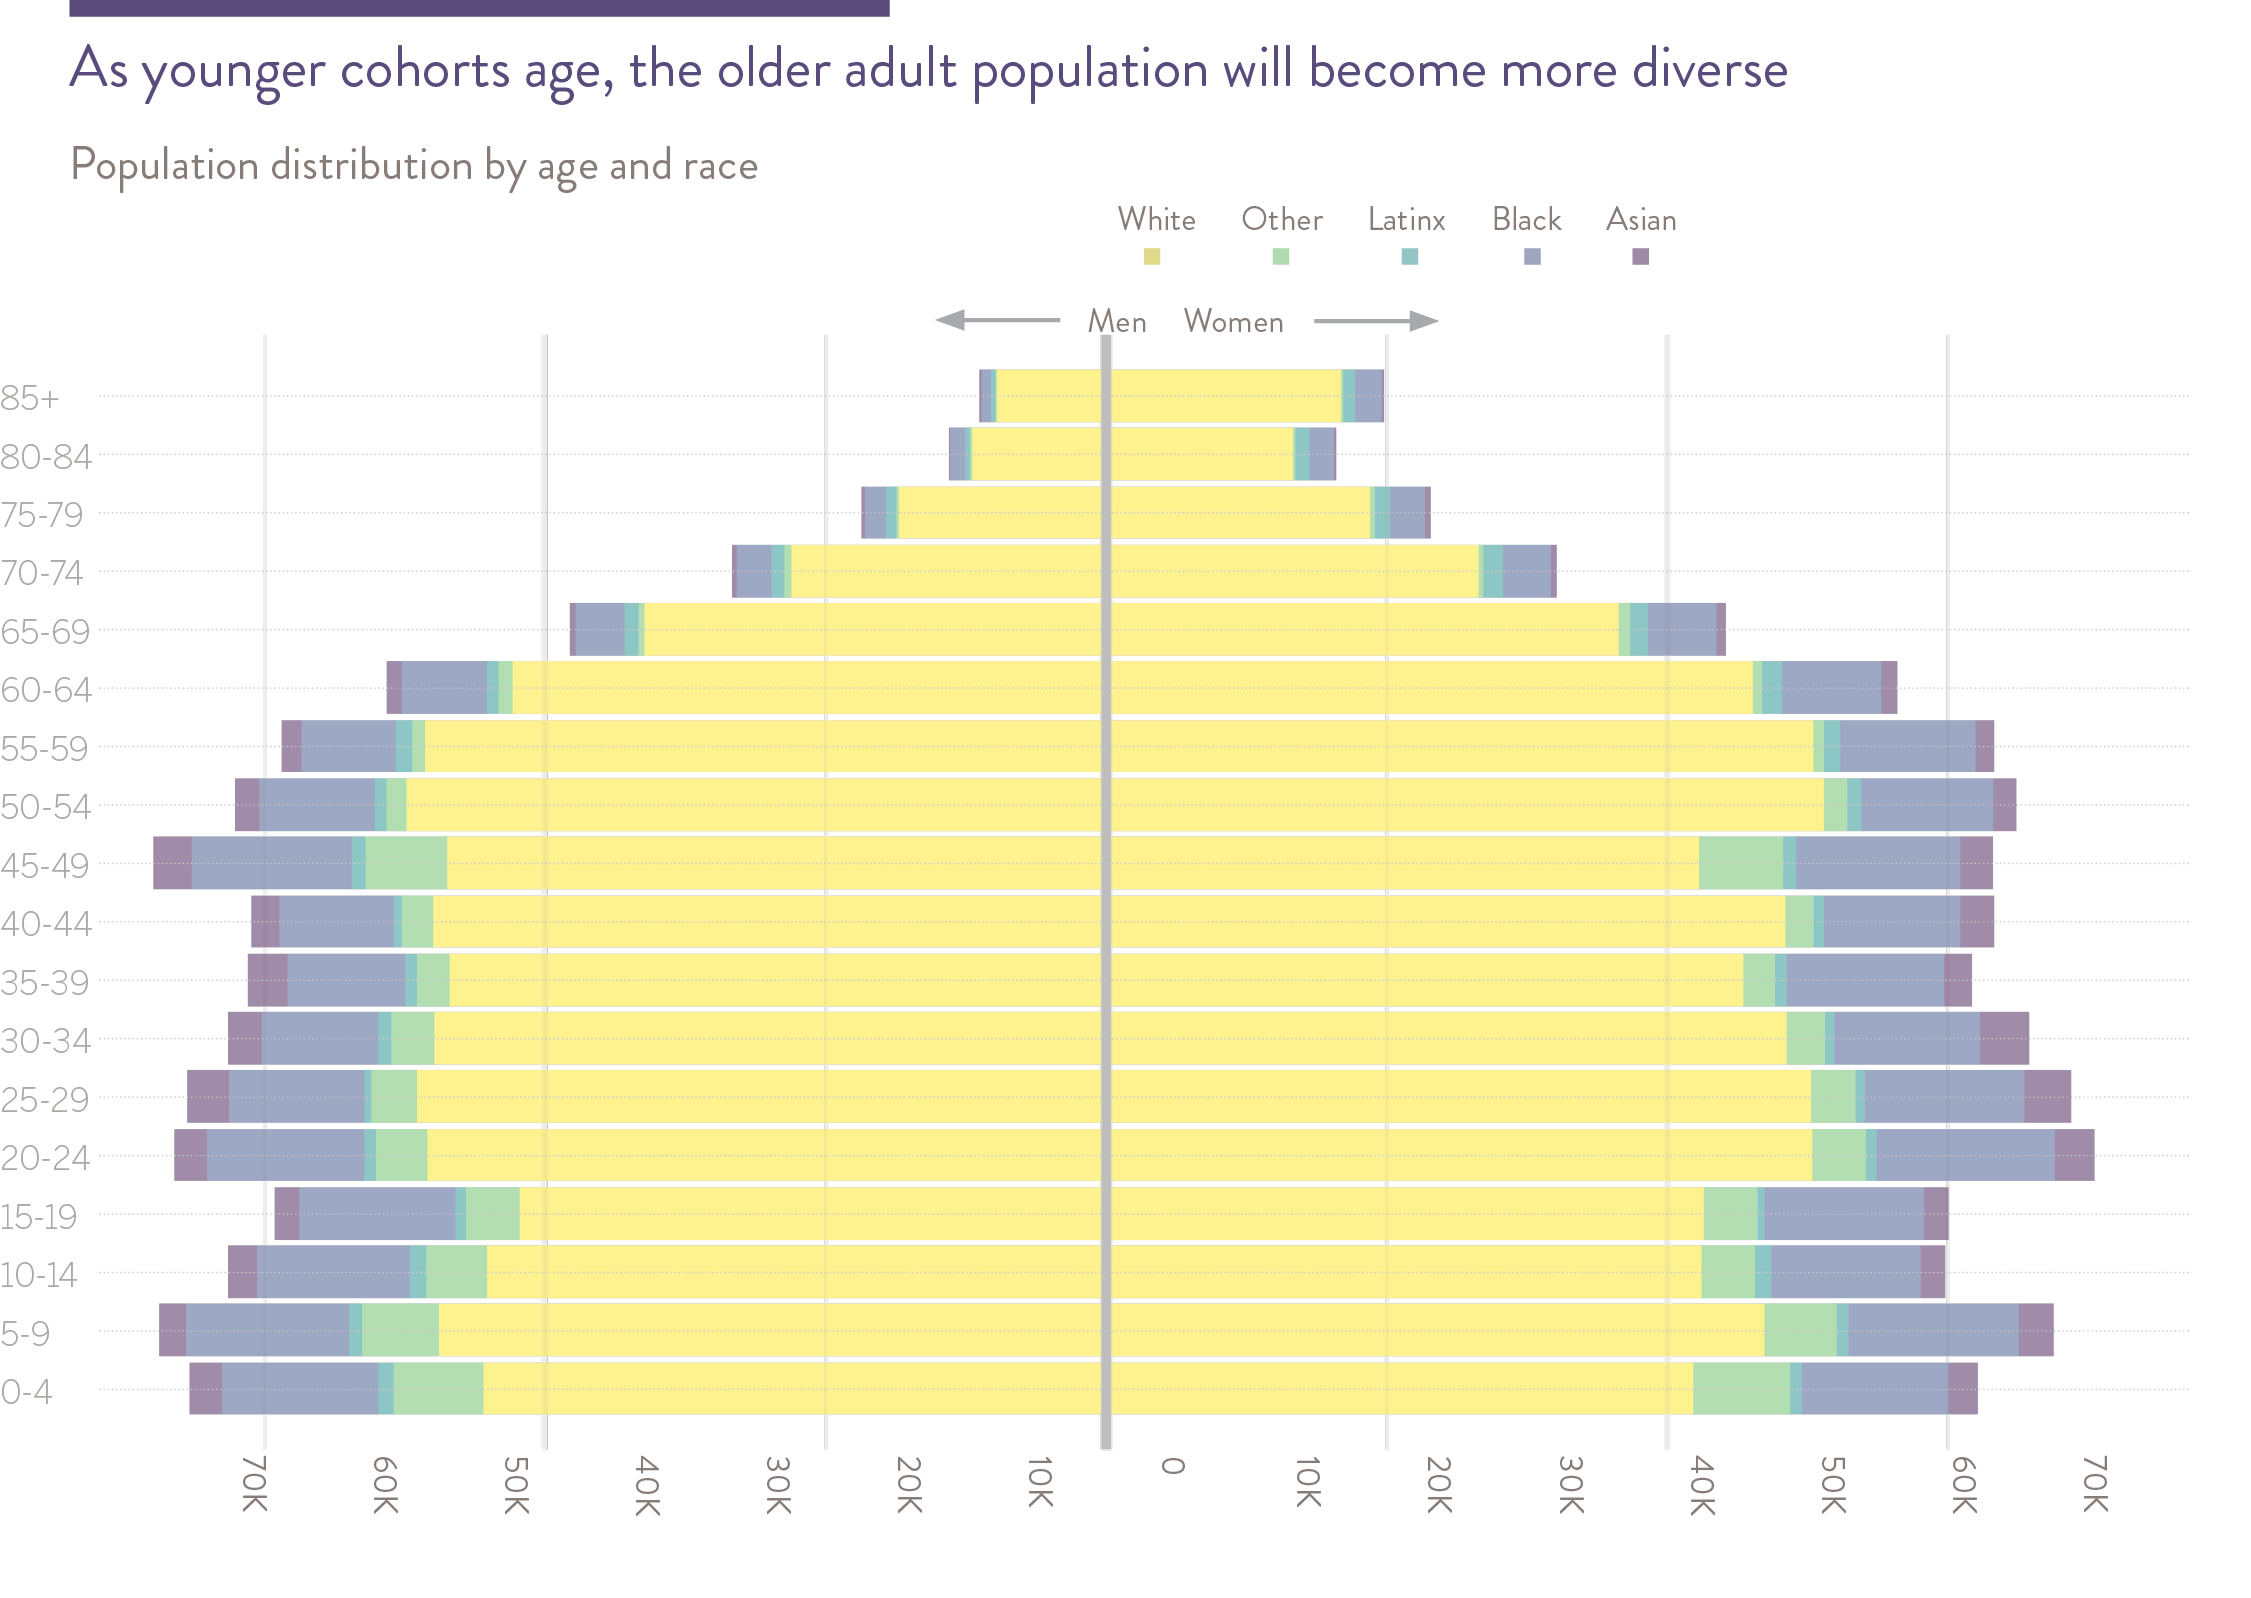 As younger cohorts age, the older adult population will become more diverse